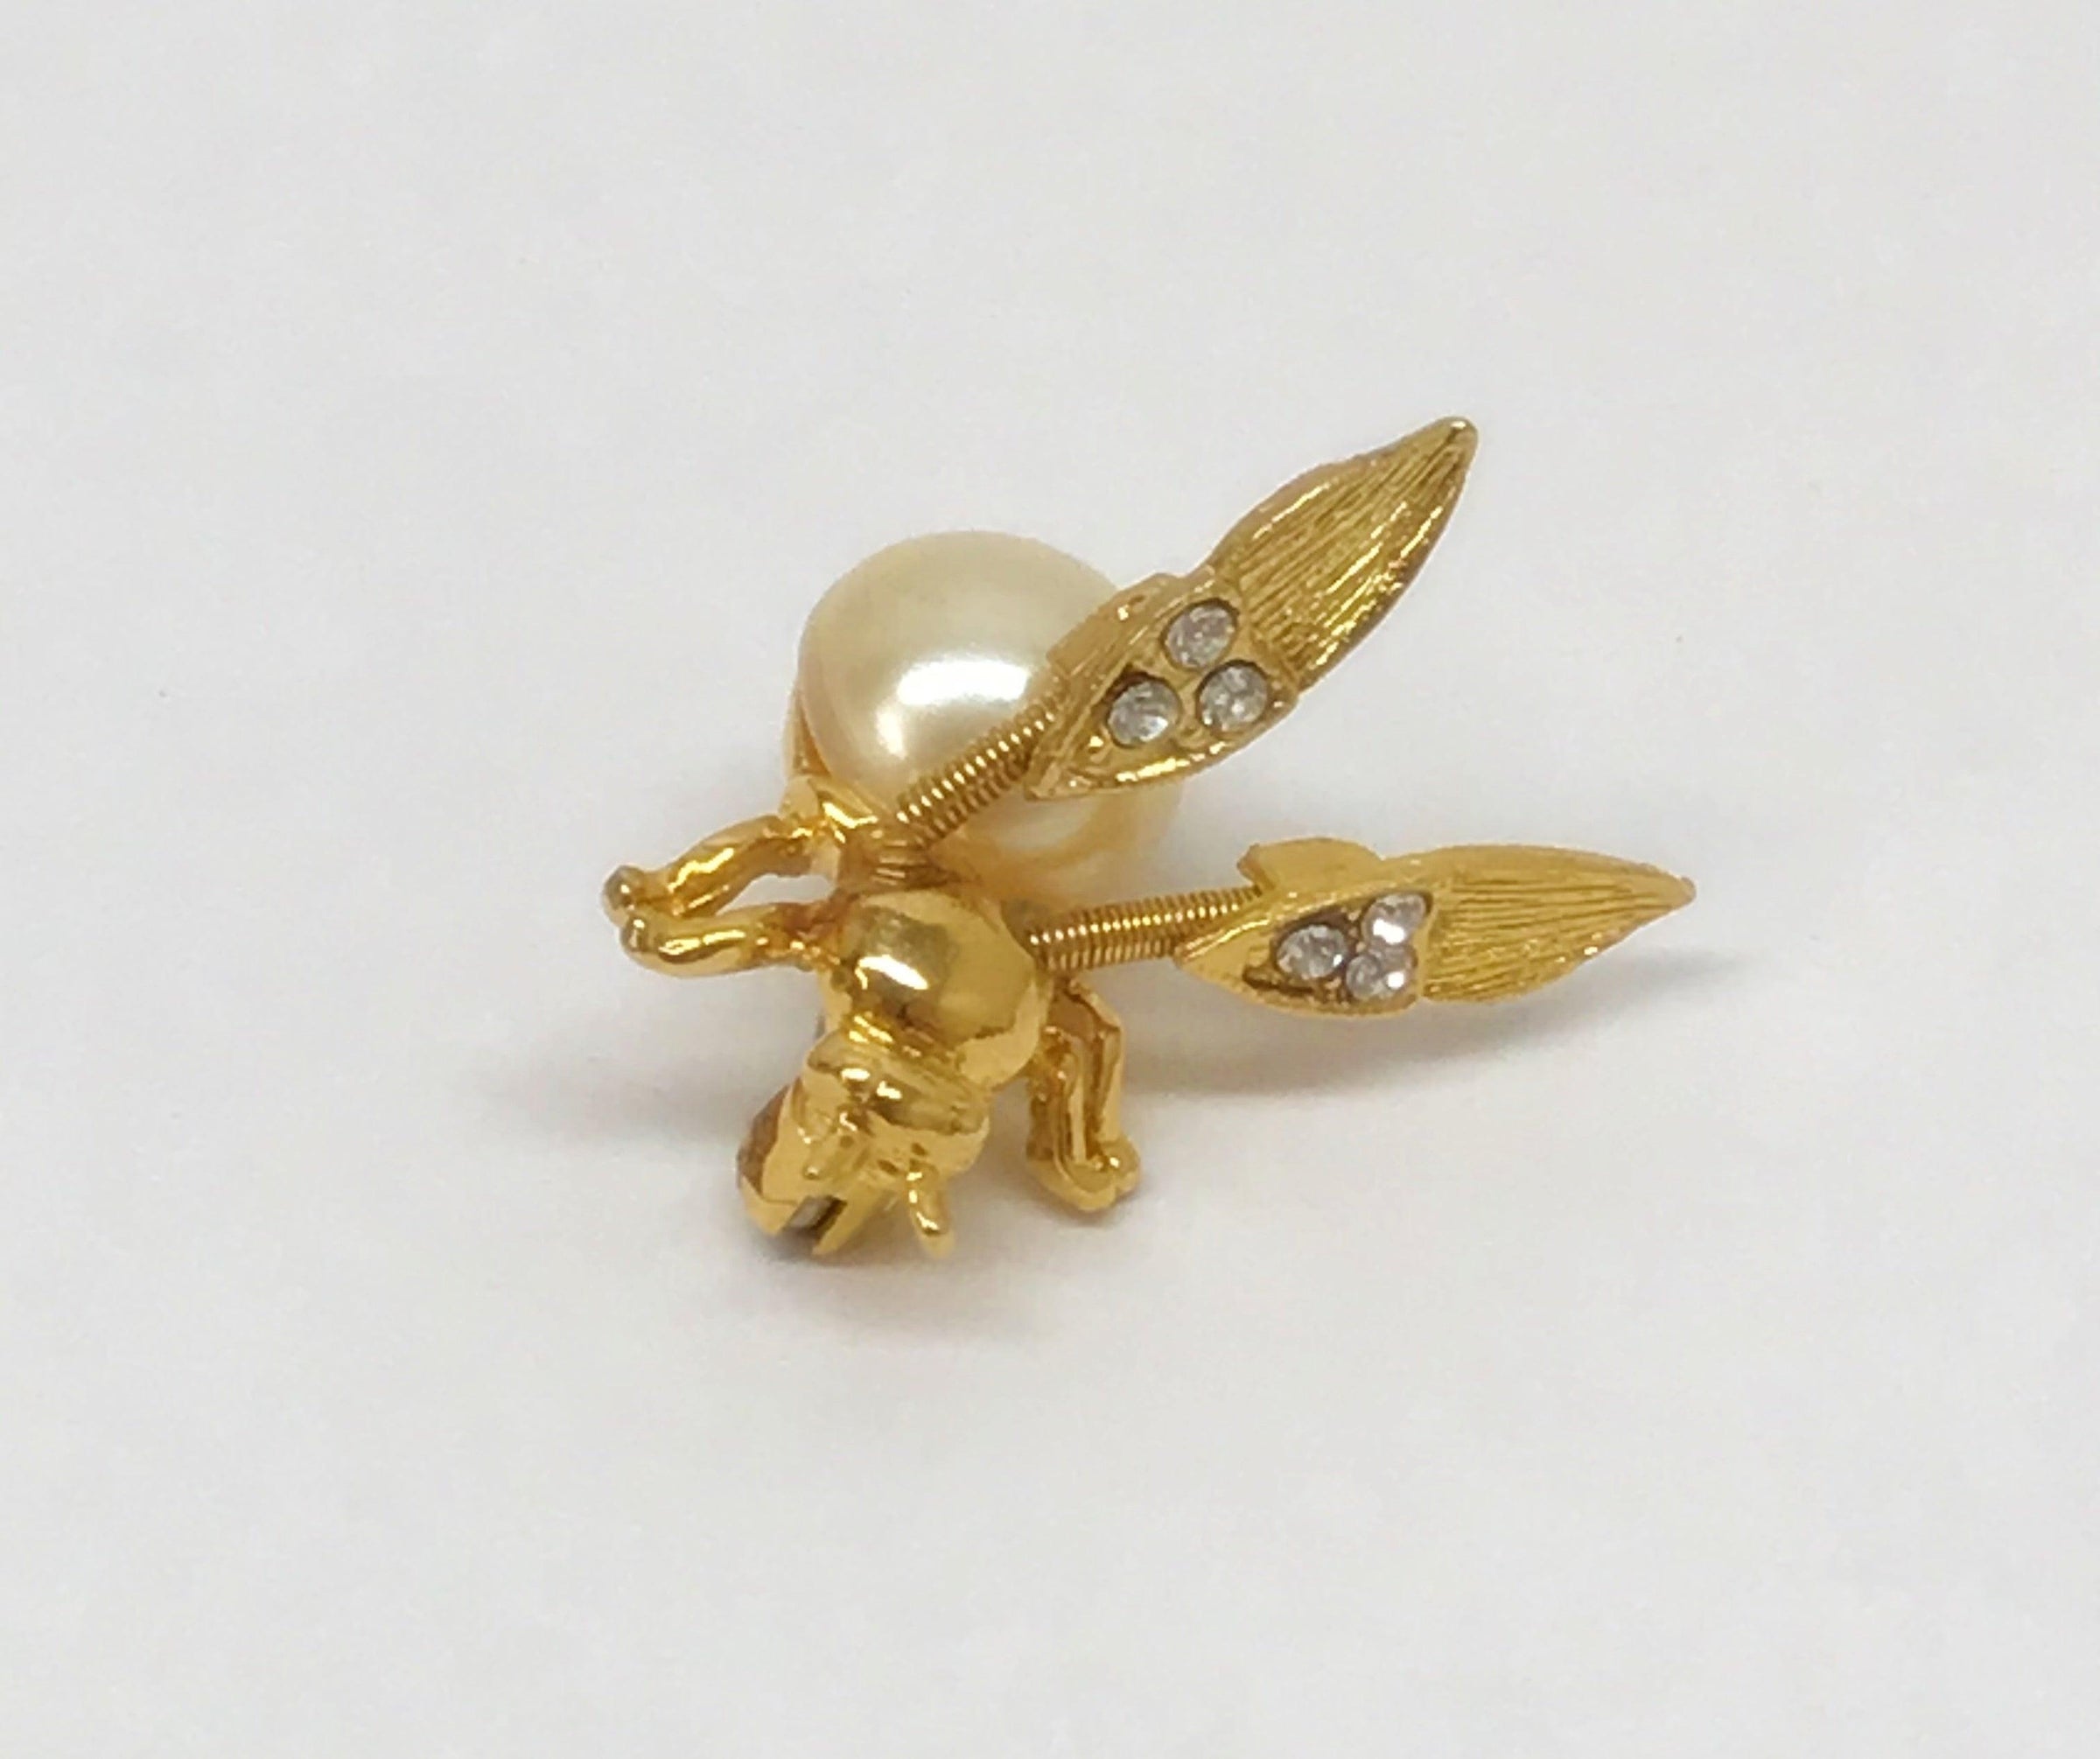 Beaded brooch bee with crown, gold bee brooch pin - Inspire Uplift